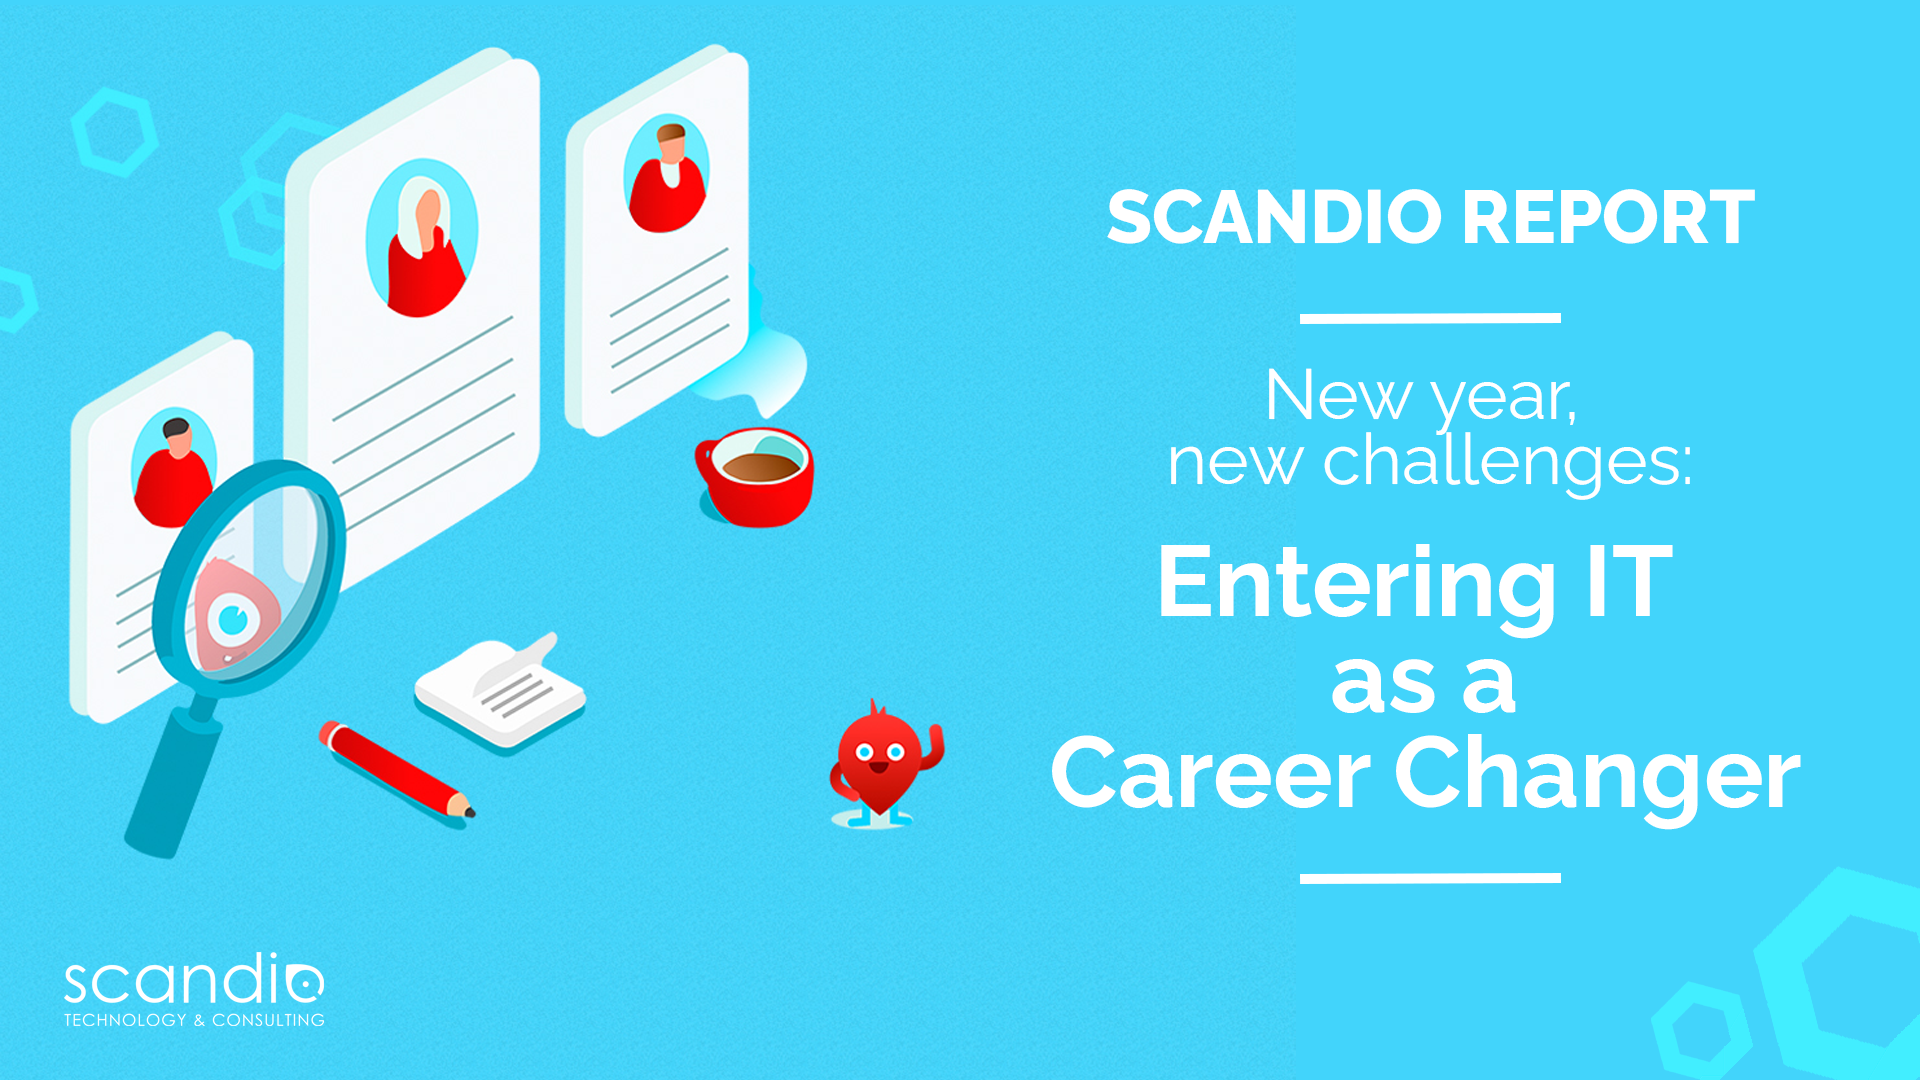 Scandio Report - Entering IT as a Career Changer